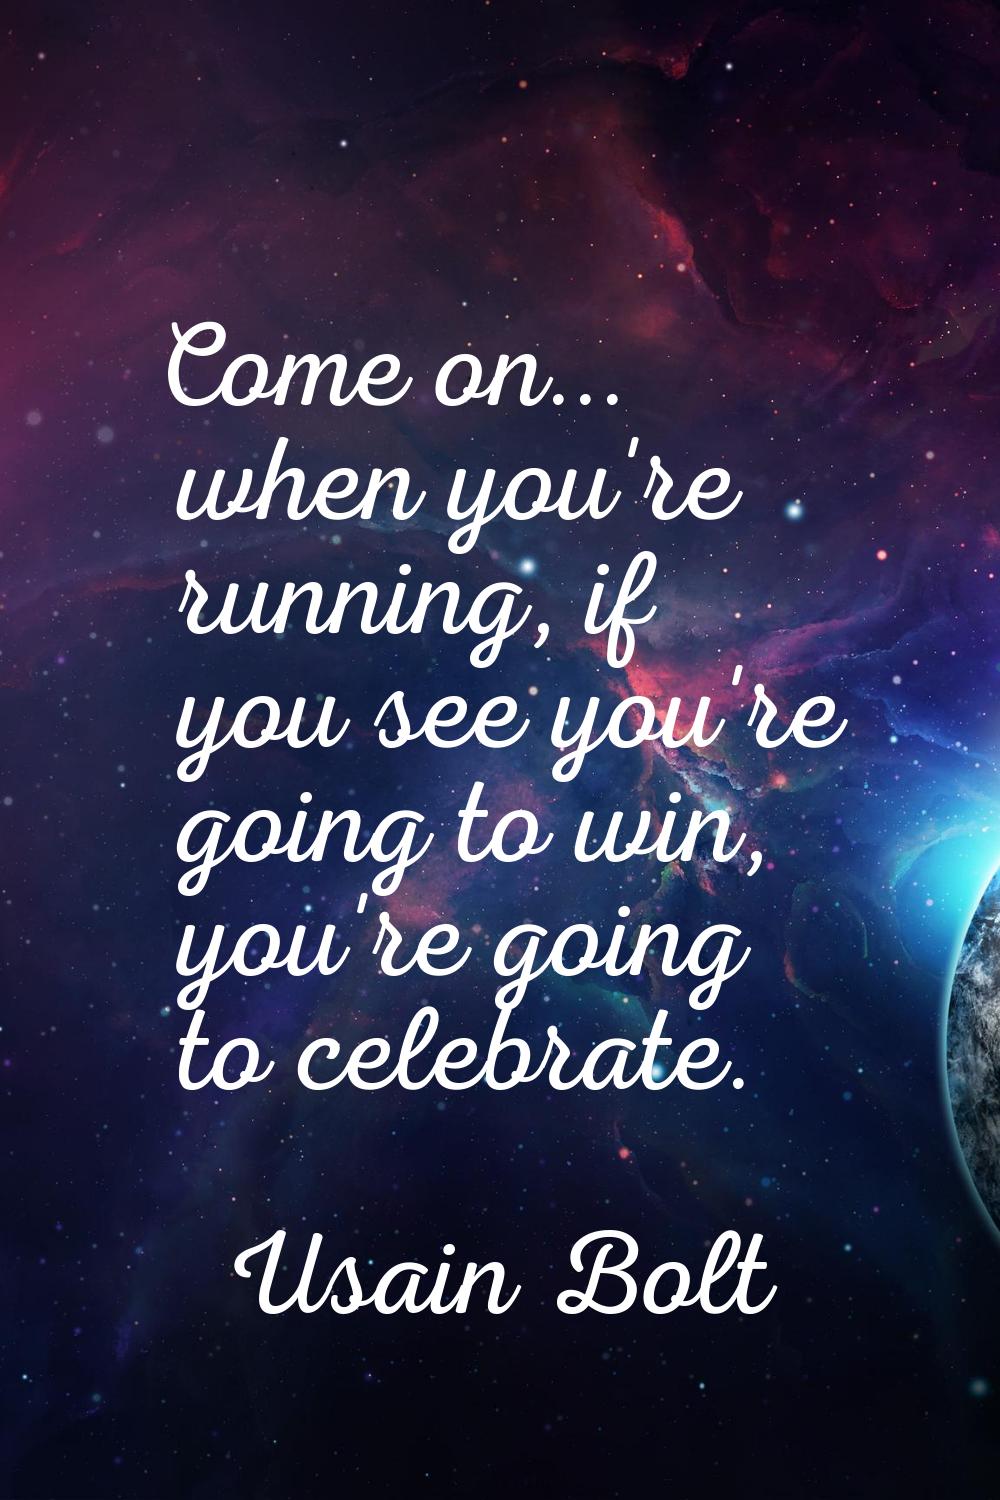 Come on... when you're running, if you see you're going to win, you're going to celebrate.